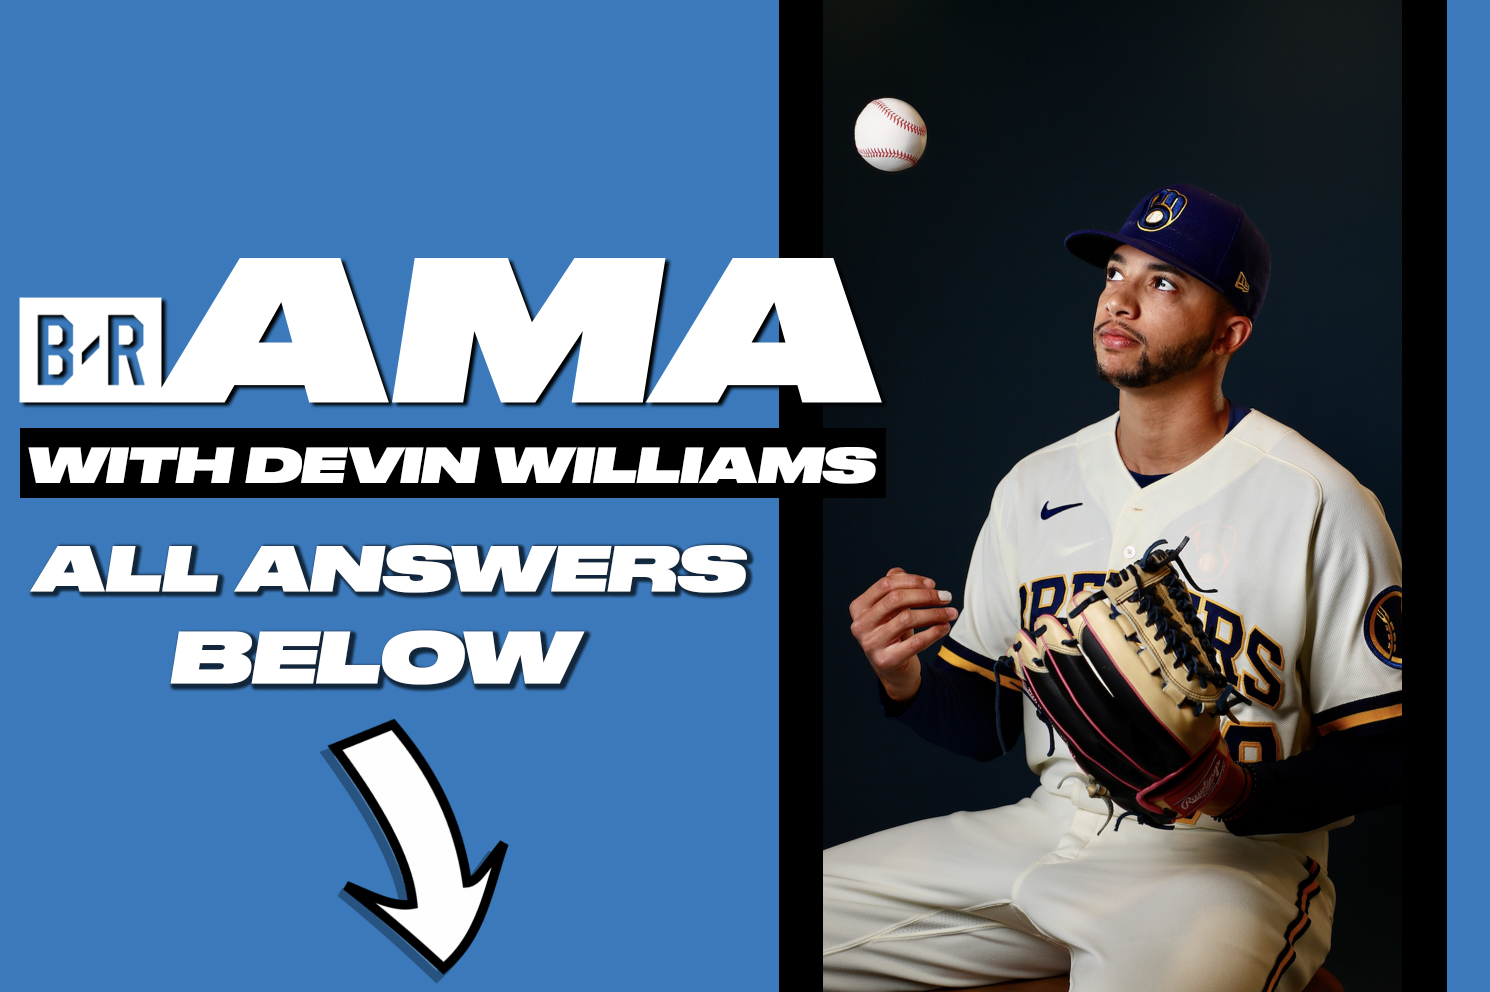 Devin Williams named National League Reliever of the Year